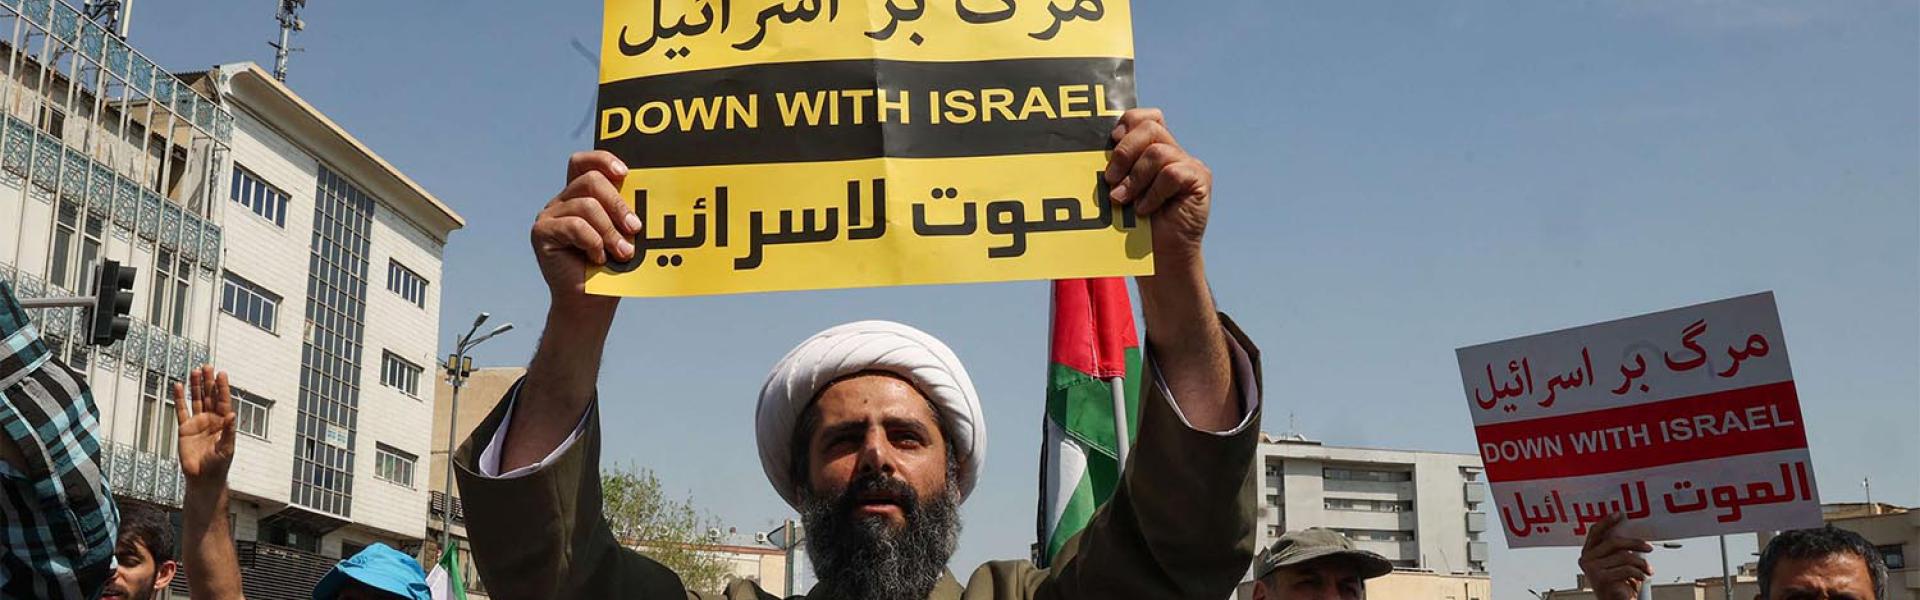 An Iranian Shiite Muslim cleric raises a placard during an anti-Israel demonstration after the Friday noon prayer in Tehran